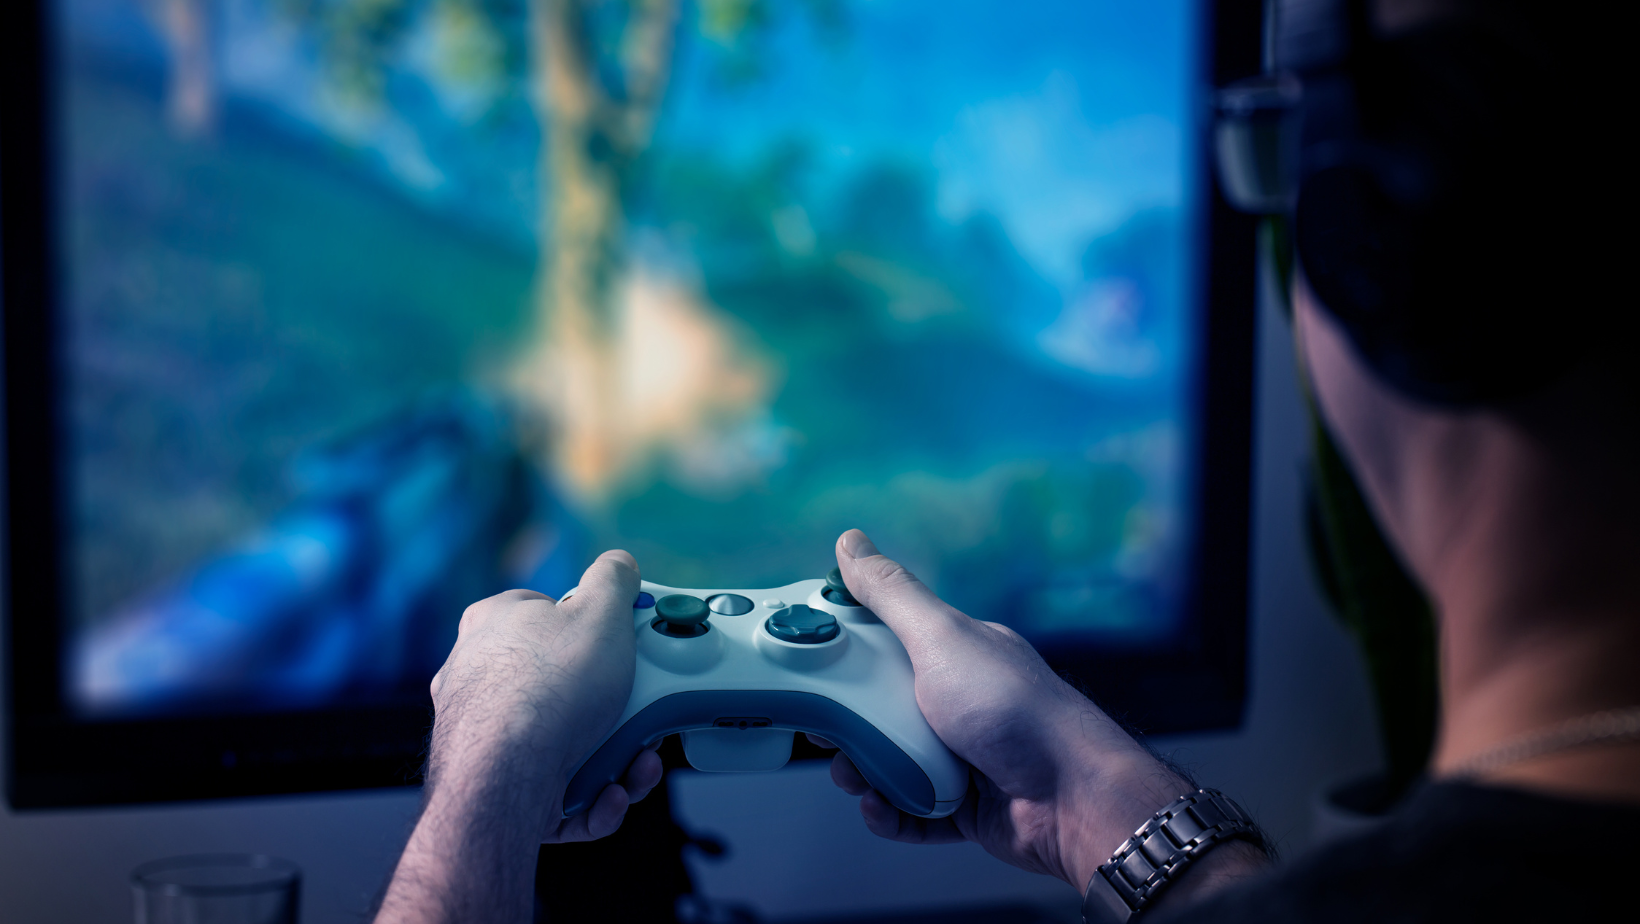 Video Games & Stress: Pros & Cons of Using Games for Relief